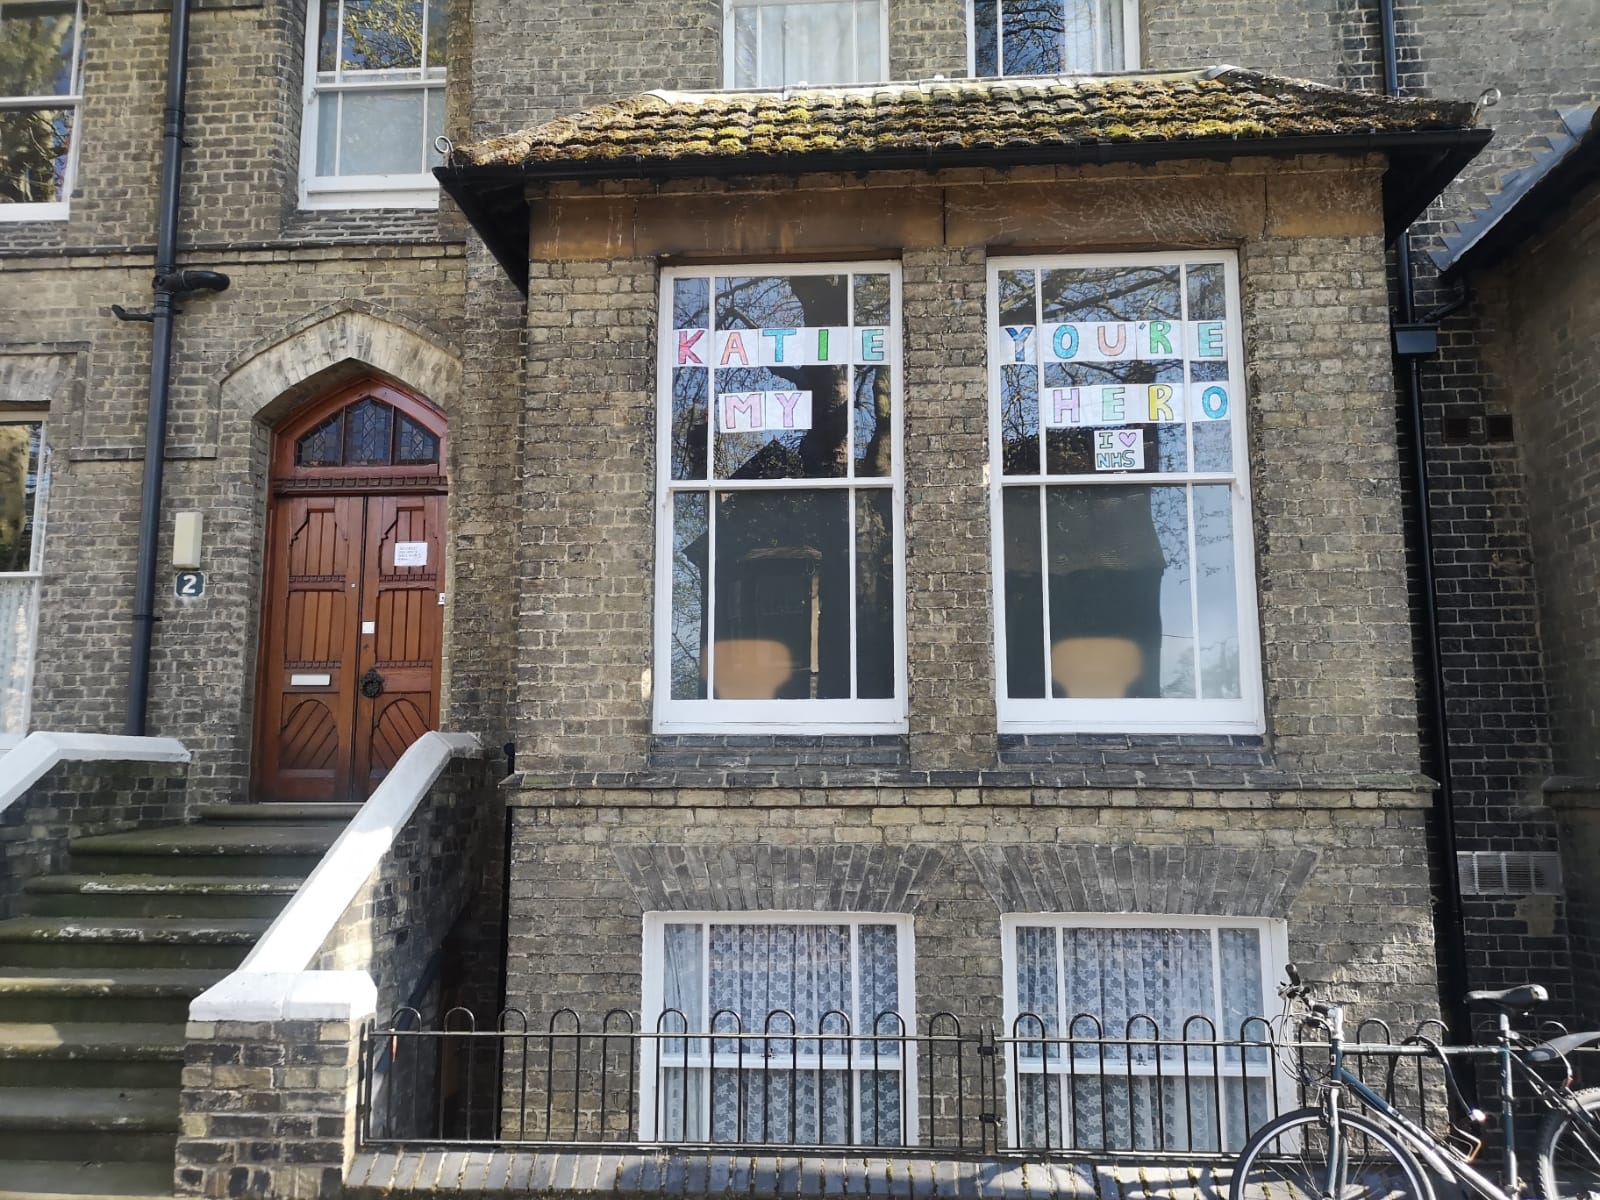 A Harvey Road house frontage with a tribute to NHS workers in the window